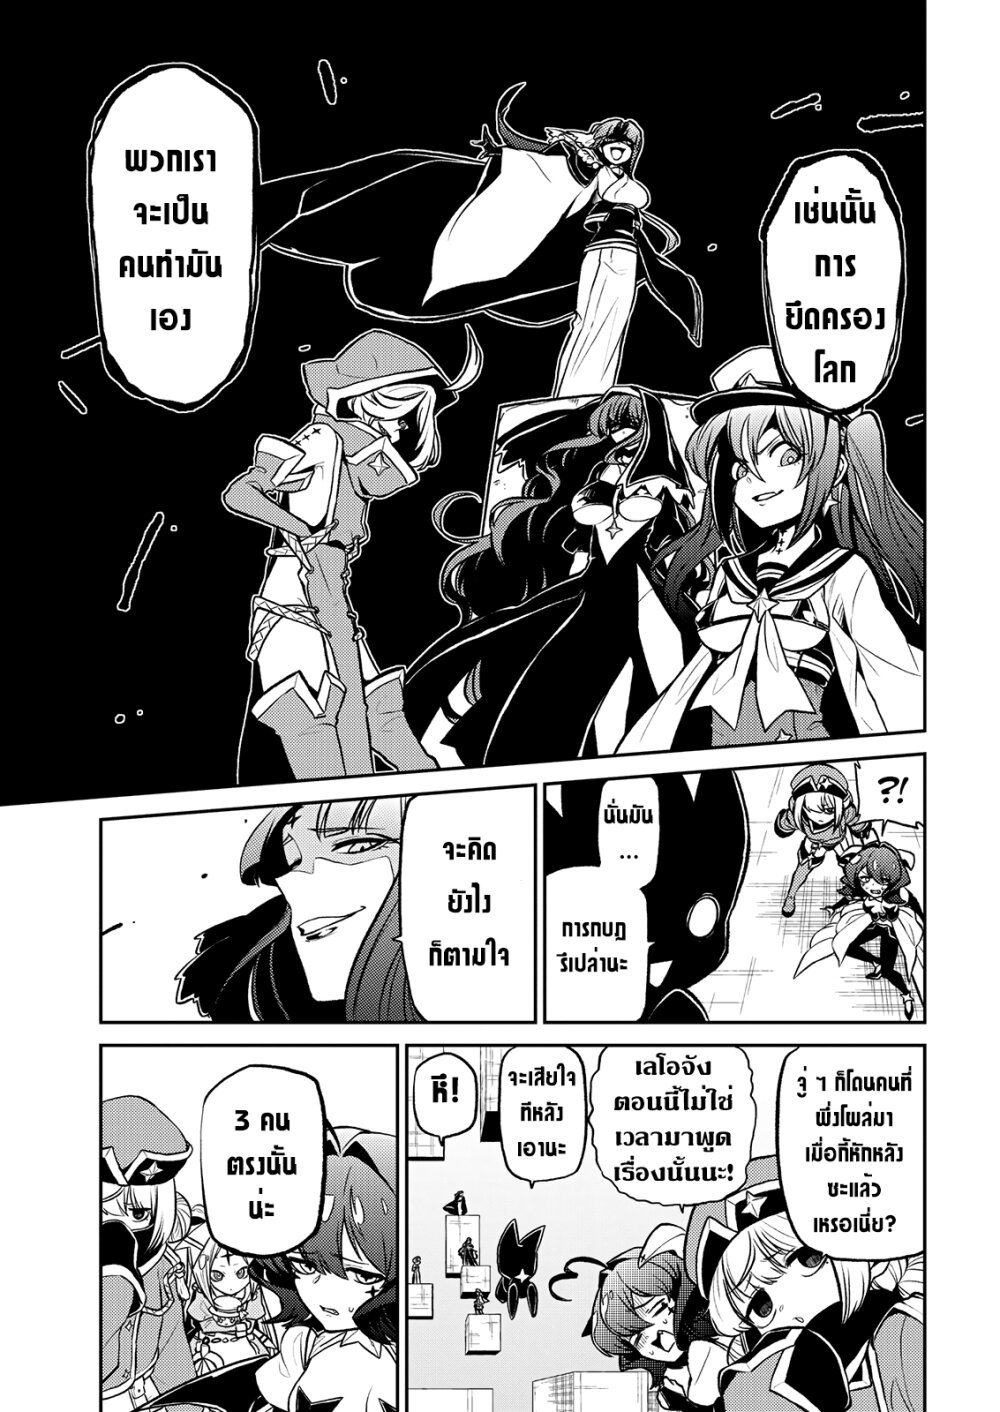 Looking up to Magical Girls 12 (9)